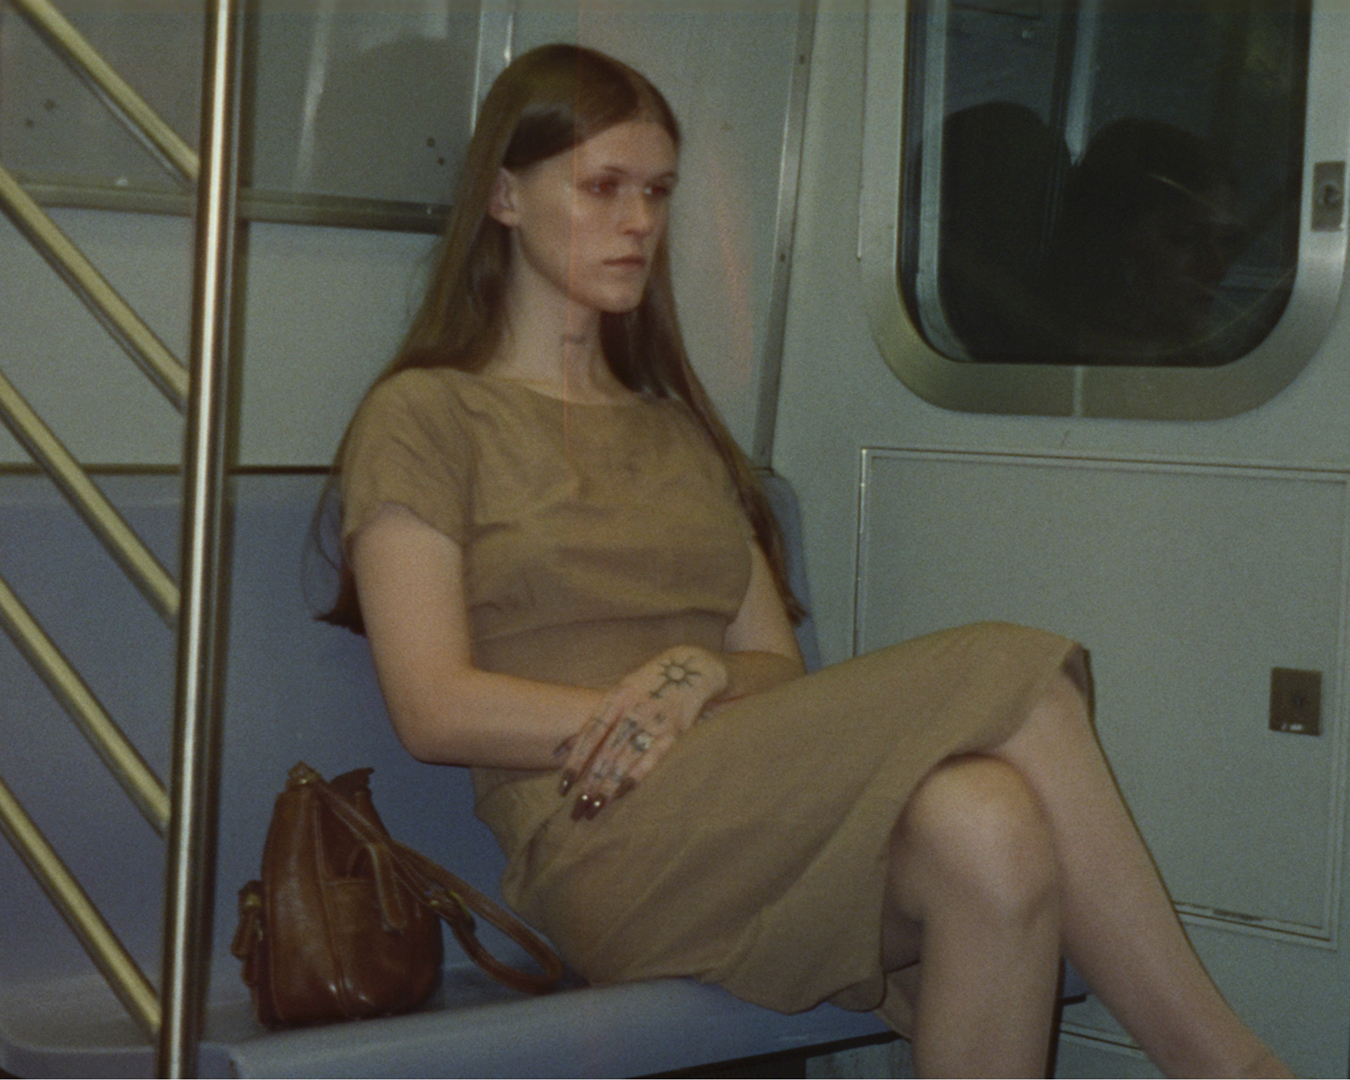 Photograph of Ethel Cain on the subway train in a photograph by Silken Weinberg featured in i-D’s The Royalty Issue, no. 370, Winter 2022